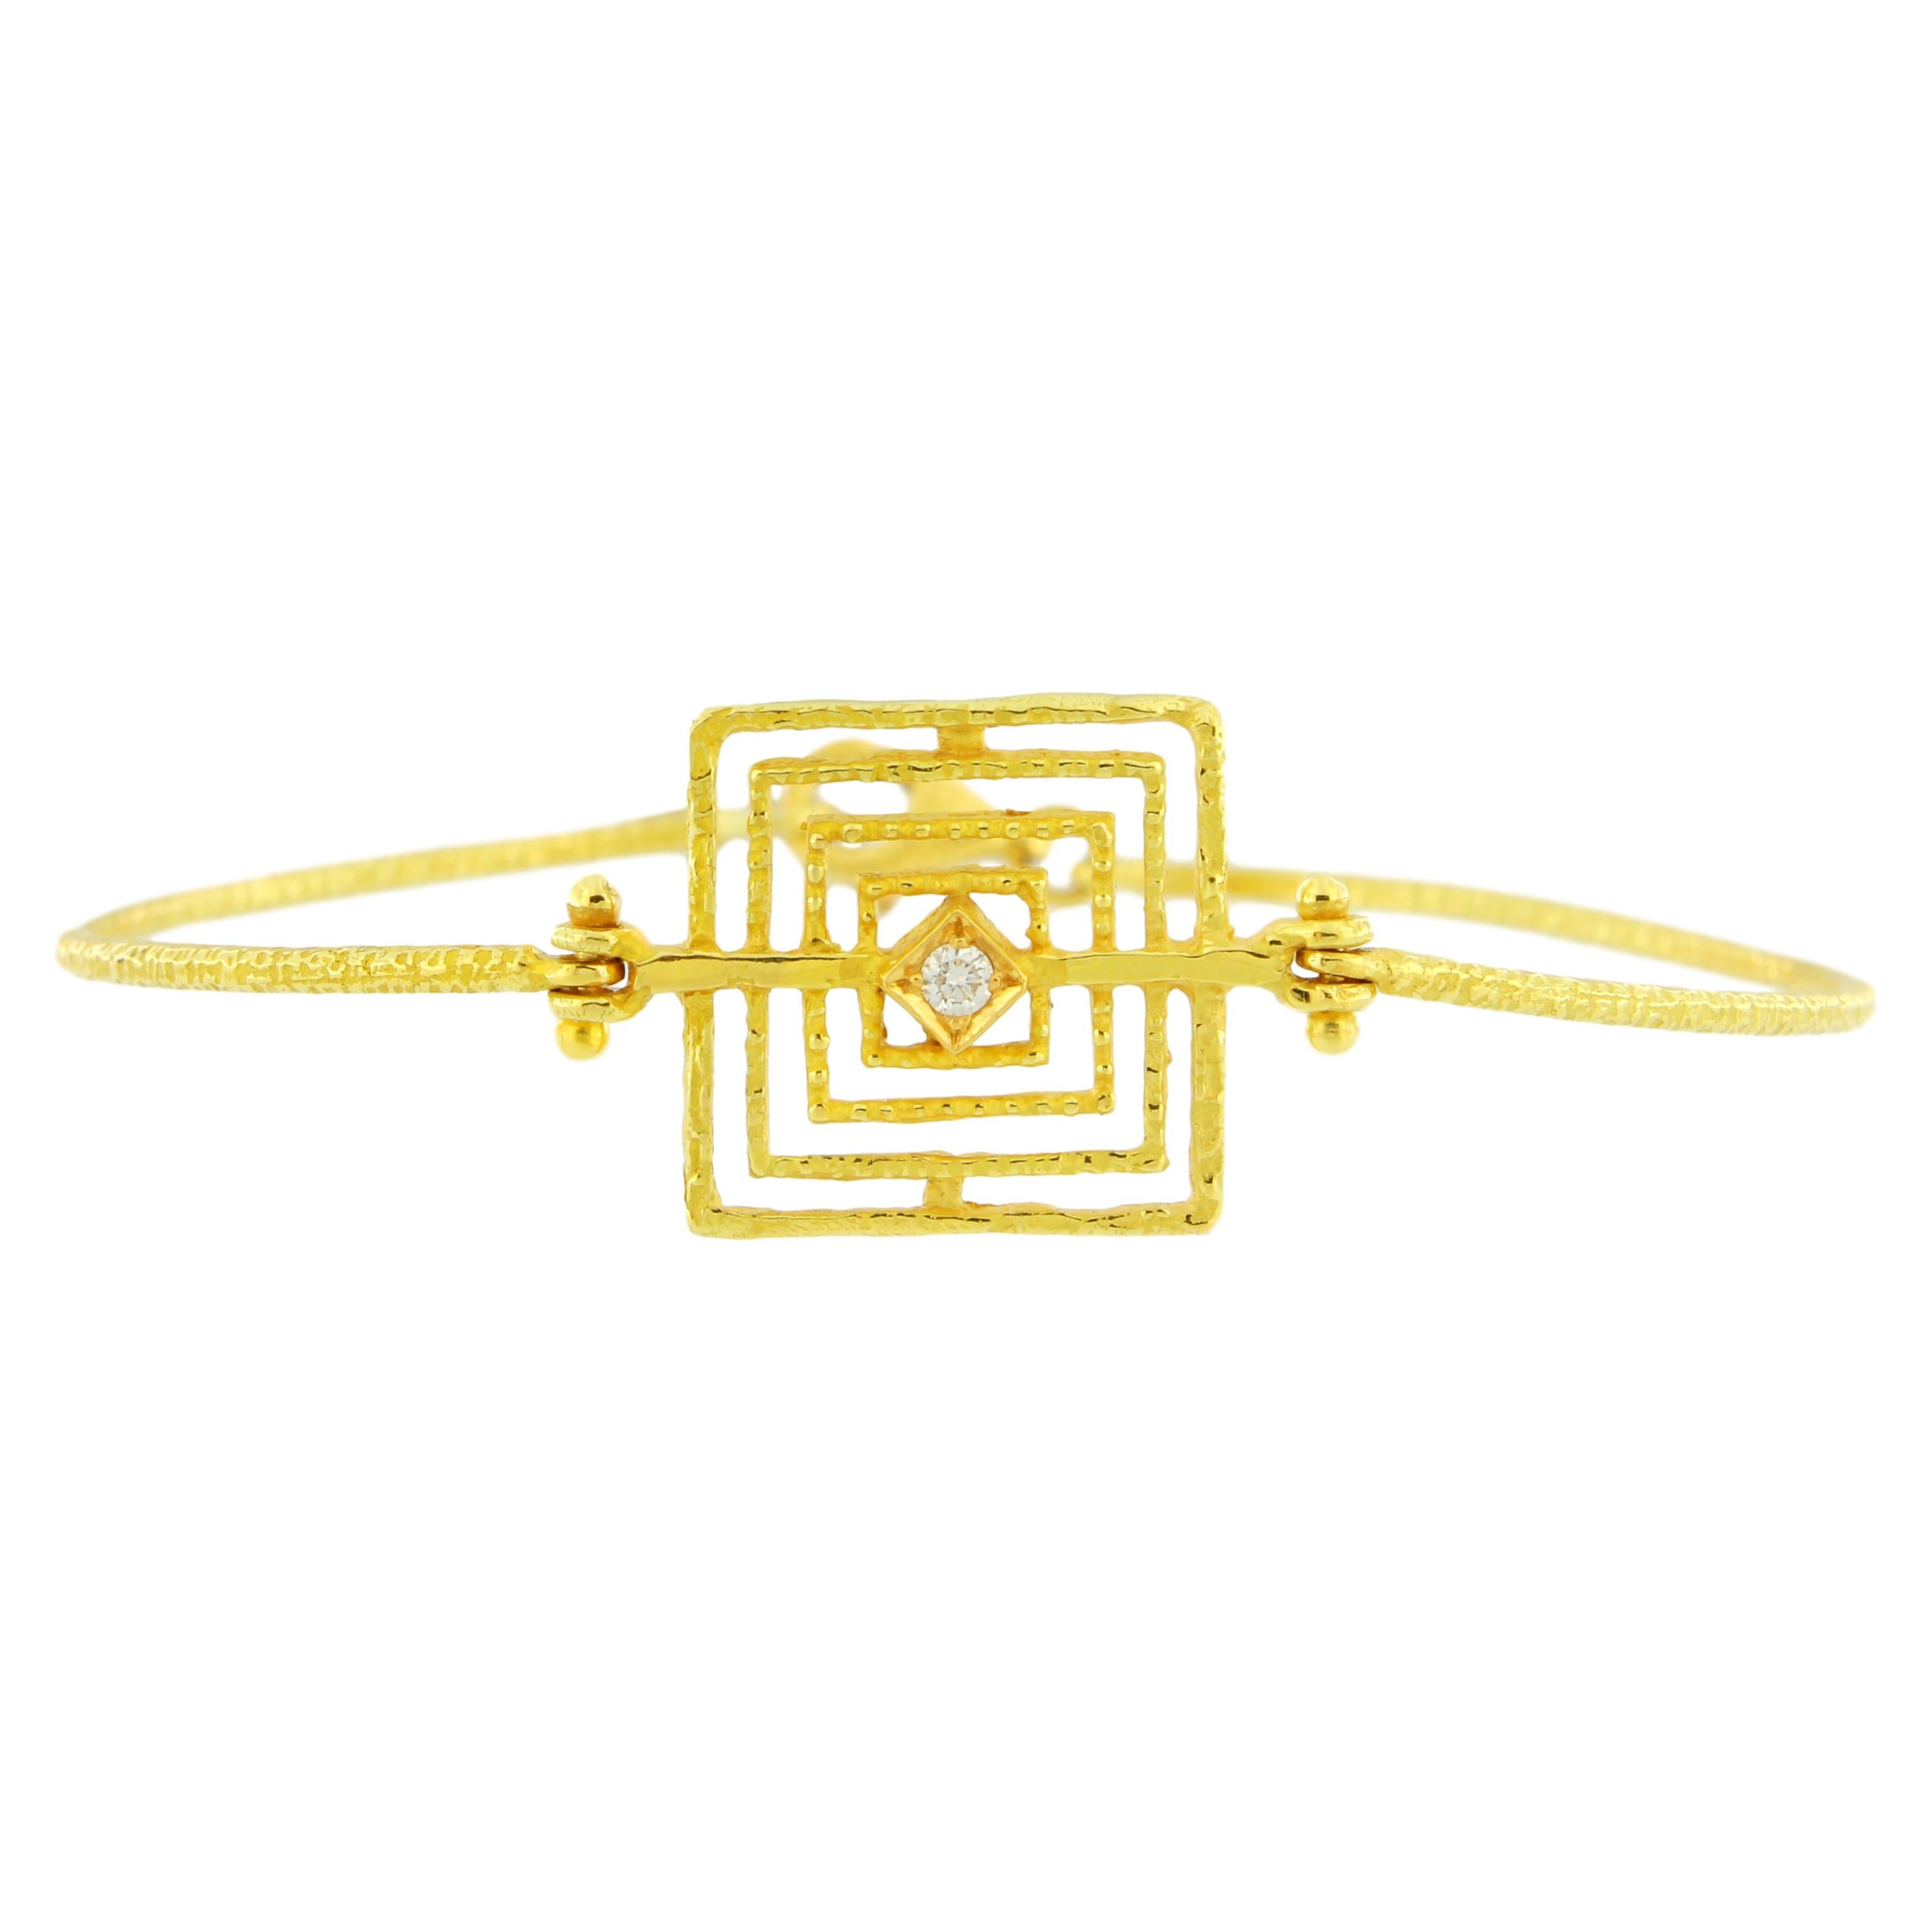 Geometric 18 Karat Satin Yellow Gold Bracelet , hand-crafted with lost-wax casting technique.

Lost-wax casting, one of the oldest techniques for creating jewelry, forms the basis of Sacchi's jewelry production. Modelling wax in the round allows to